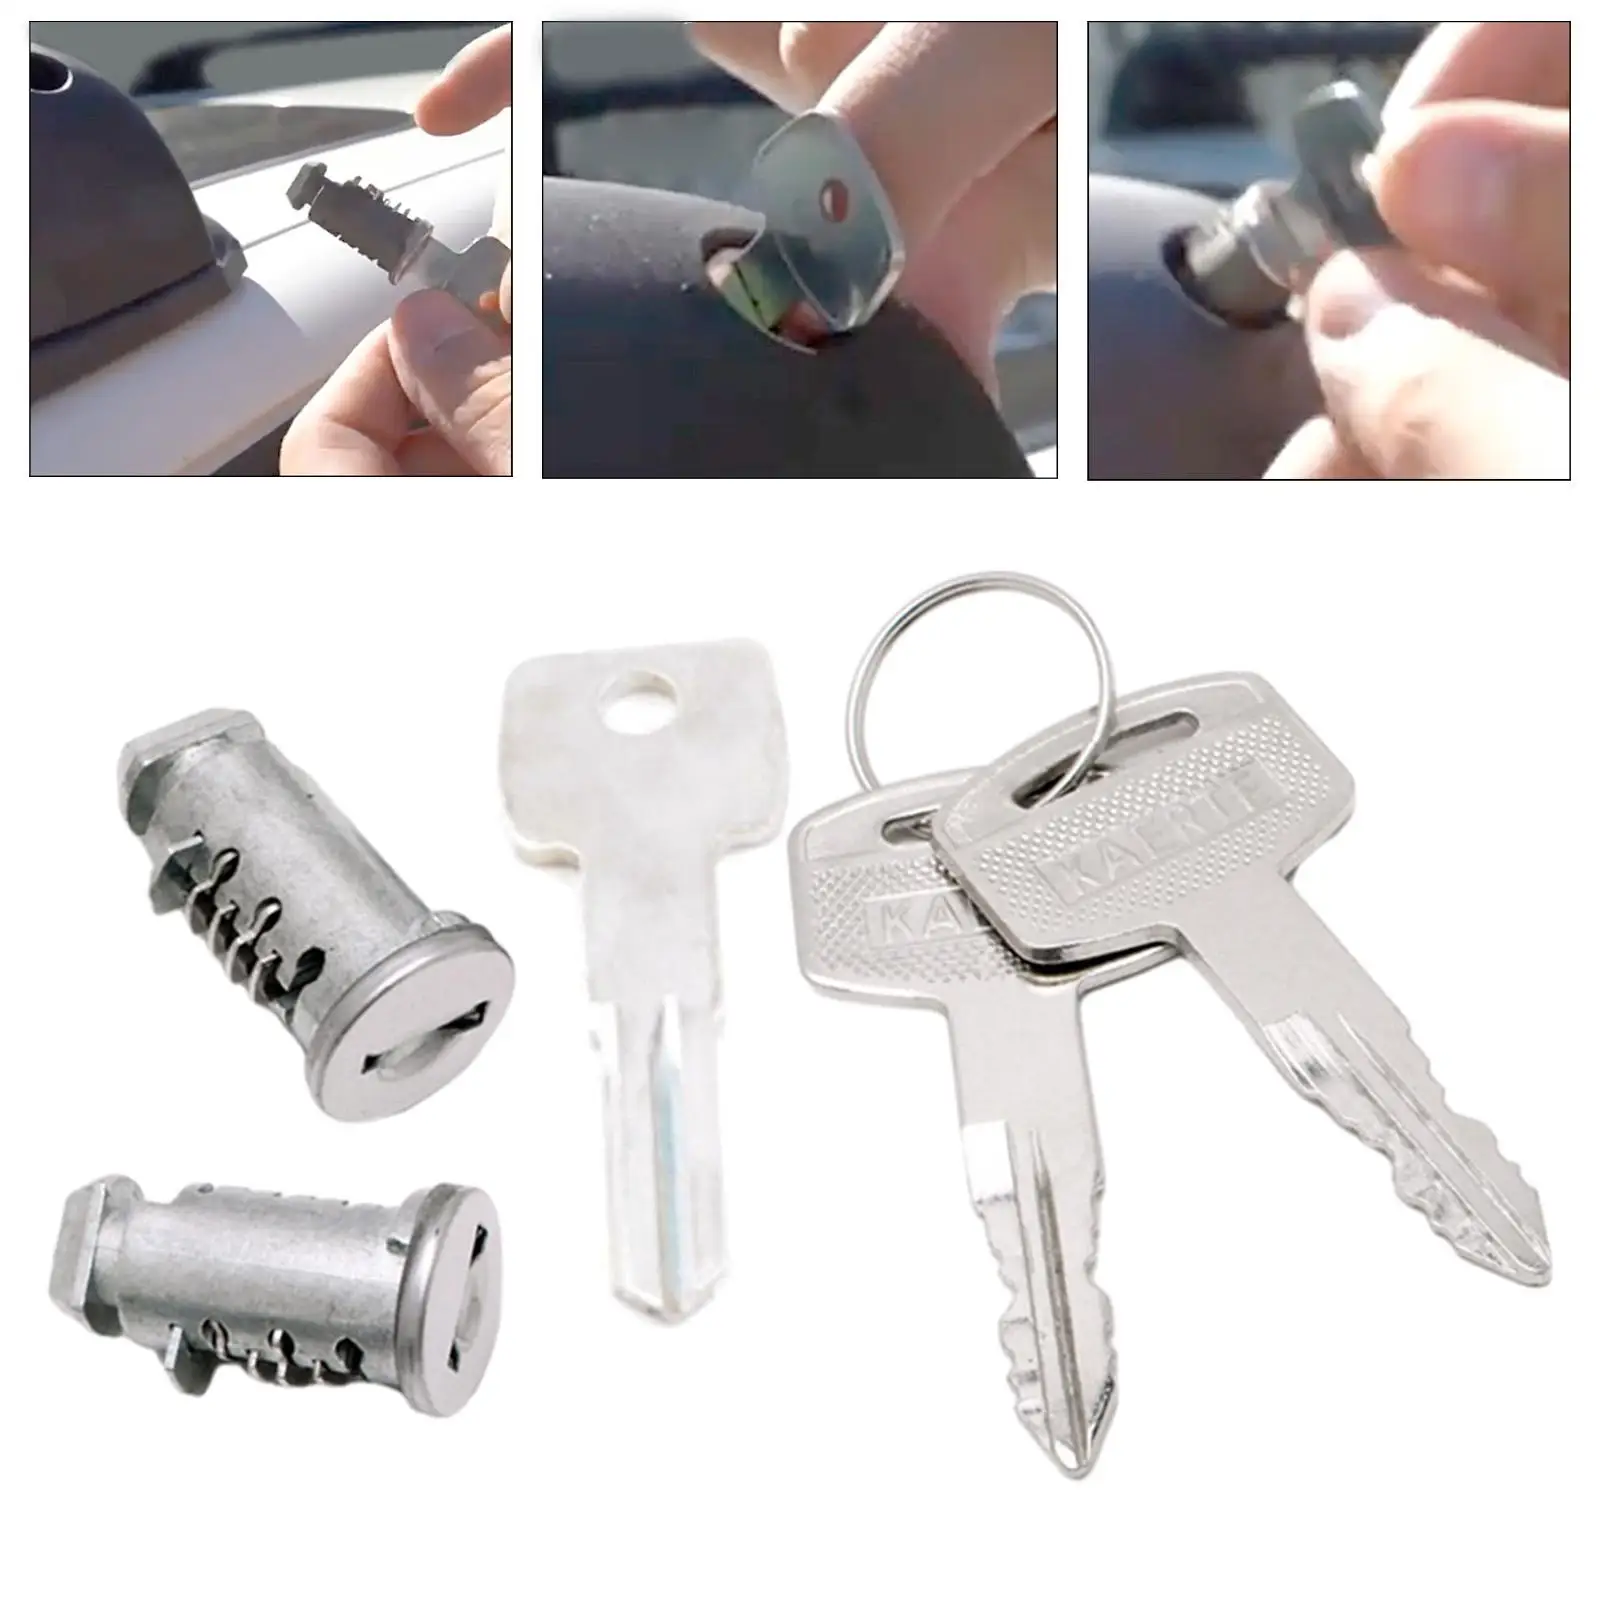 2 Pieces Lock Cylinders for Car ,Racks System, Cargo Bar Lock with Key Premium Roof Rack Kit, Lock Cores for Car Rack Locks